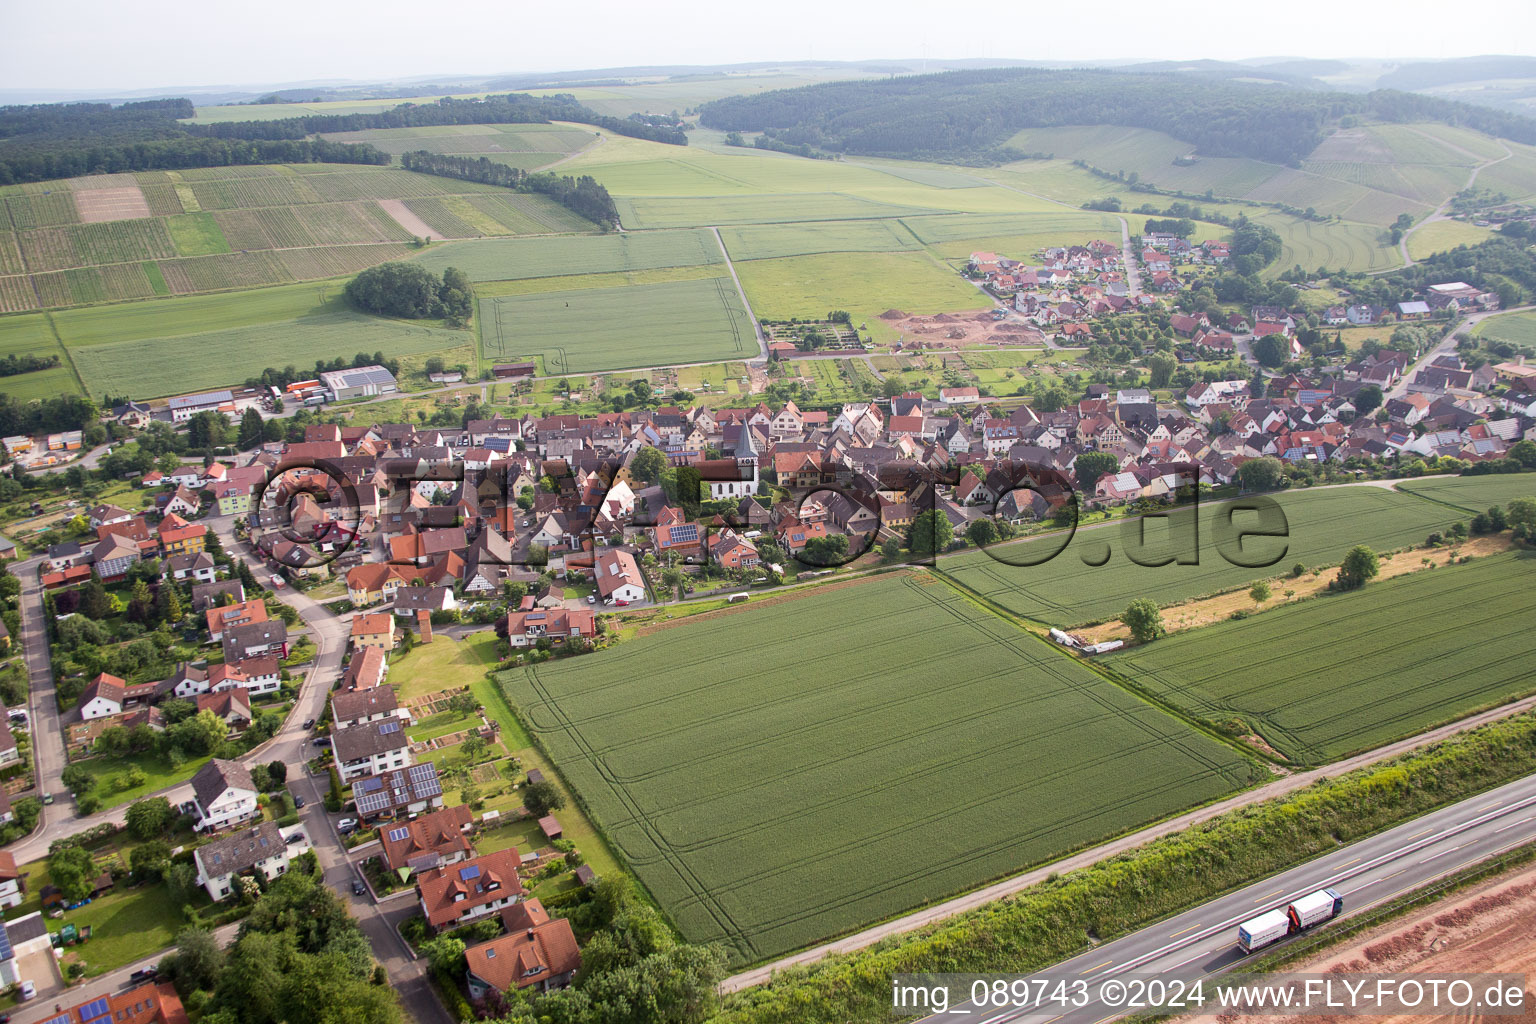 Aerial photograpy of Village - view behind motorway A3 on the edge of agricultural fields and farmland in the district Dertingen in Wertheim in the state Baden-Wurttemberg